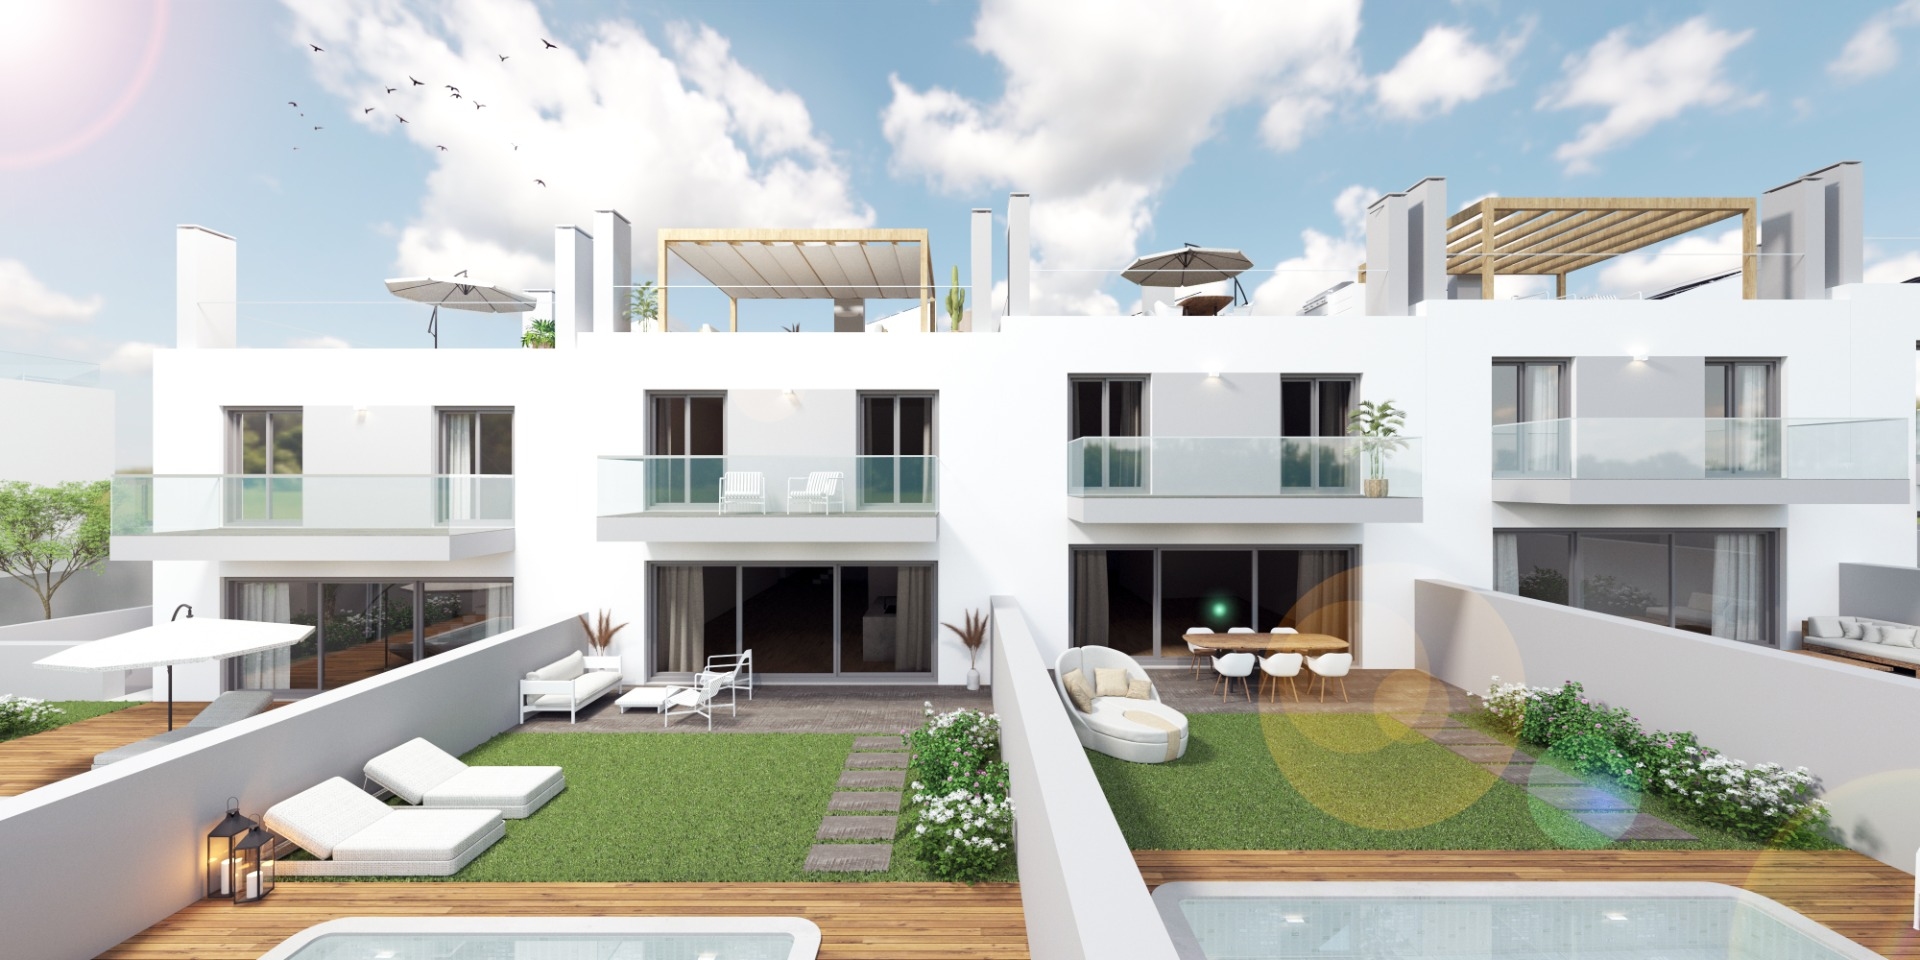 Off Plan Investment - 4 Bedroom Linked Villas with Ria Formosa Views, near Faro City | VM2072 Investment to buy off plan property with river views. Top construction quality with high energy efficiency. The properties are perfect for turnkey holiday villas or family homes.